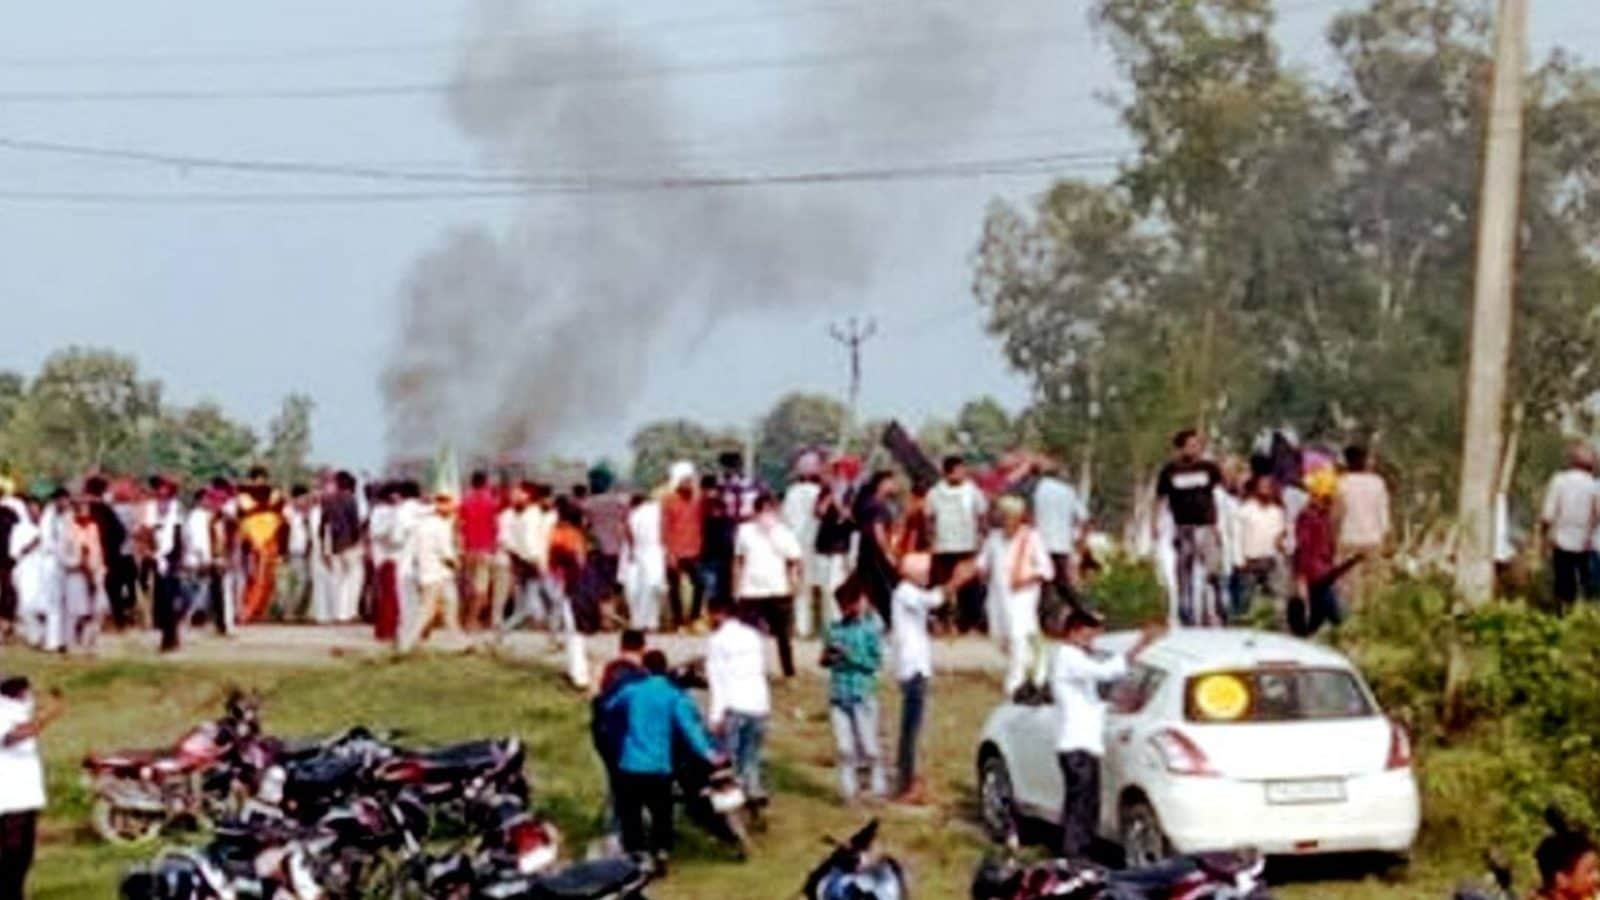 OPINION: Lakhimpur Kheri Violence is a Well-Thought-Out Trap By Protesters Not Farmers